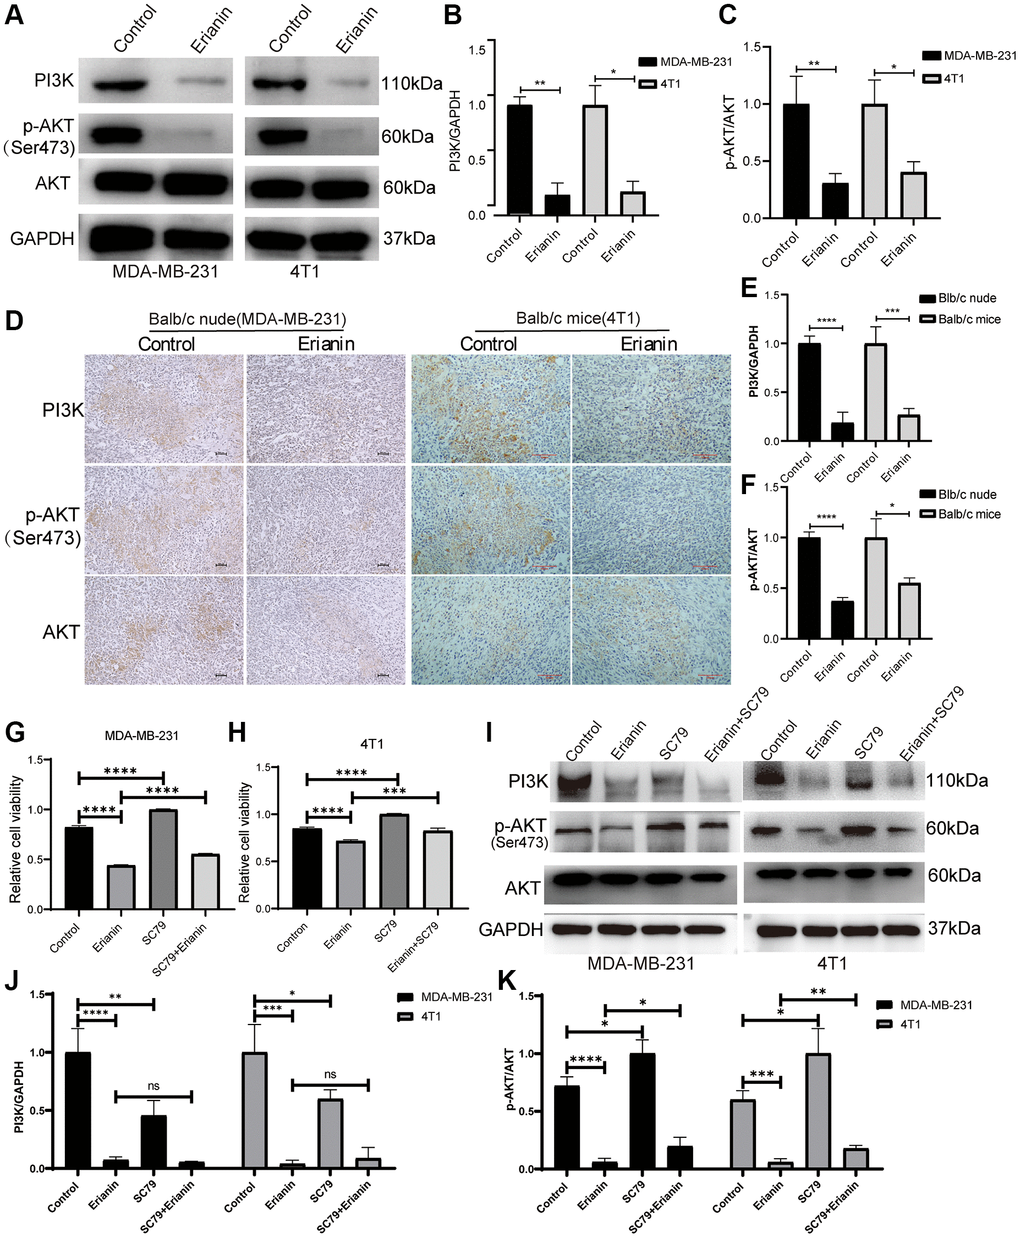 Erianin inhibits the PI3K-AKT signaling pathway in TNBC. (A) Western blot detection of PI3K and AKT expression as well as AKT phosphorylation after Erianin treatment of MDA-MB-231 and 4T1 cells. (B) Quantitative graphs of PI3K expression after Erianin treatment of MDA-MB-231 and 4T1 cells. (C) Quantitative graphs of p-AKT expression after Erianin treatment of MDA-MB-231 and 4T1 cells. (D) Immunohistochemistry detection of PI3K and AKT expression as well as AKT phosphorylation in two transplantation tumor models. (E) Quantitative graphs of PI3K expression after Erianin treatment of two transplantation tumor models. (F) Immunohistochemical detection of PI3K and AKT expression as well as AKT phosphorylation in two transplantation tumor models. (G) MDA-MB-21 cells were treated with 40 nM of Erianin and 2 ug/ml of SC79 for 24 hours, and then the viability was determined using the CCK-8 assay. (H) 4T1 cells were treated with 80 nM of Erianin and 2 ug/ml of SC79 for 24 hours, and then the viability was determined using the CCK-8 assay. (I) Western blot detection of AKT expression and AKT phosphorylation after Erianin and SC79 treatment of MDA-MB-231 and 4T1 cells. (J) Quantitative graphs of PI3K expression in MDA-MB-231 and 4T1 cells. (K) Quantitative graphs of AKT phosphorylation expression in MDA-MB-231 and 4T1 cells.